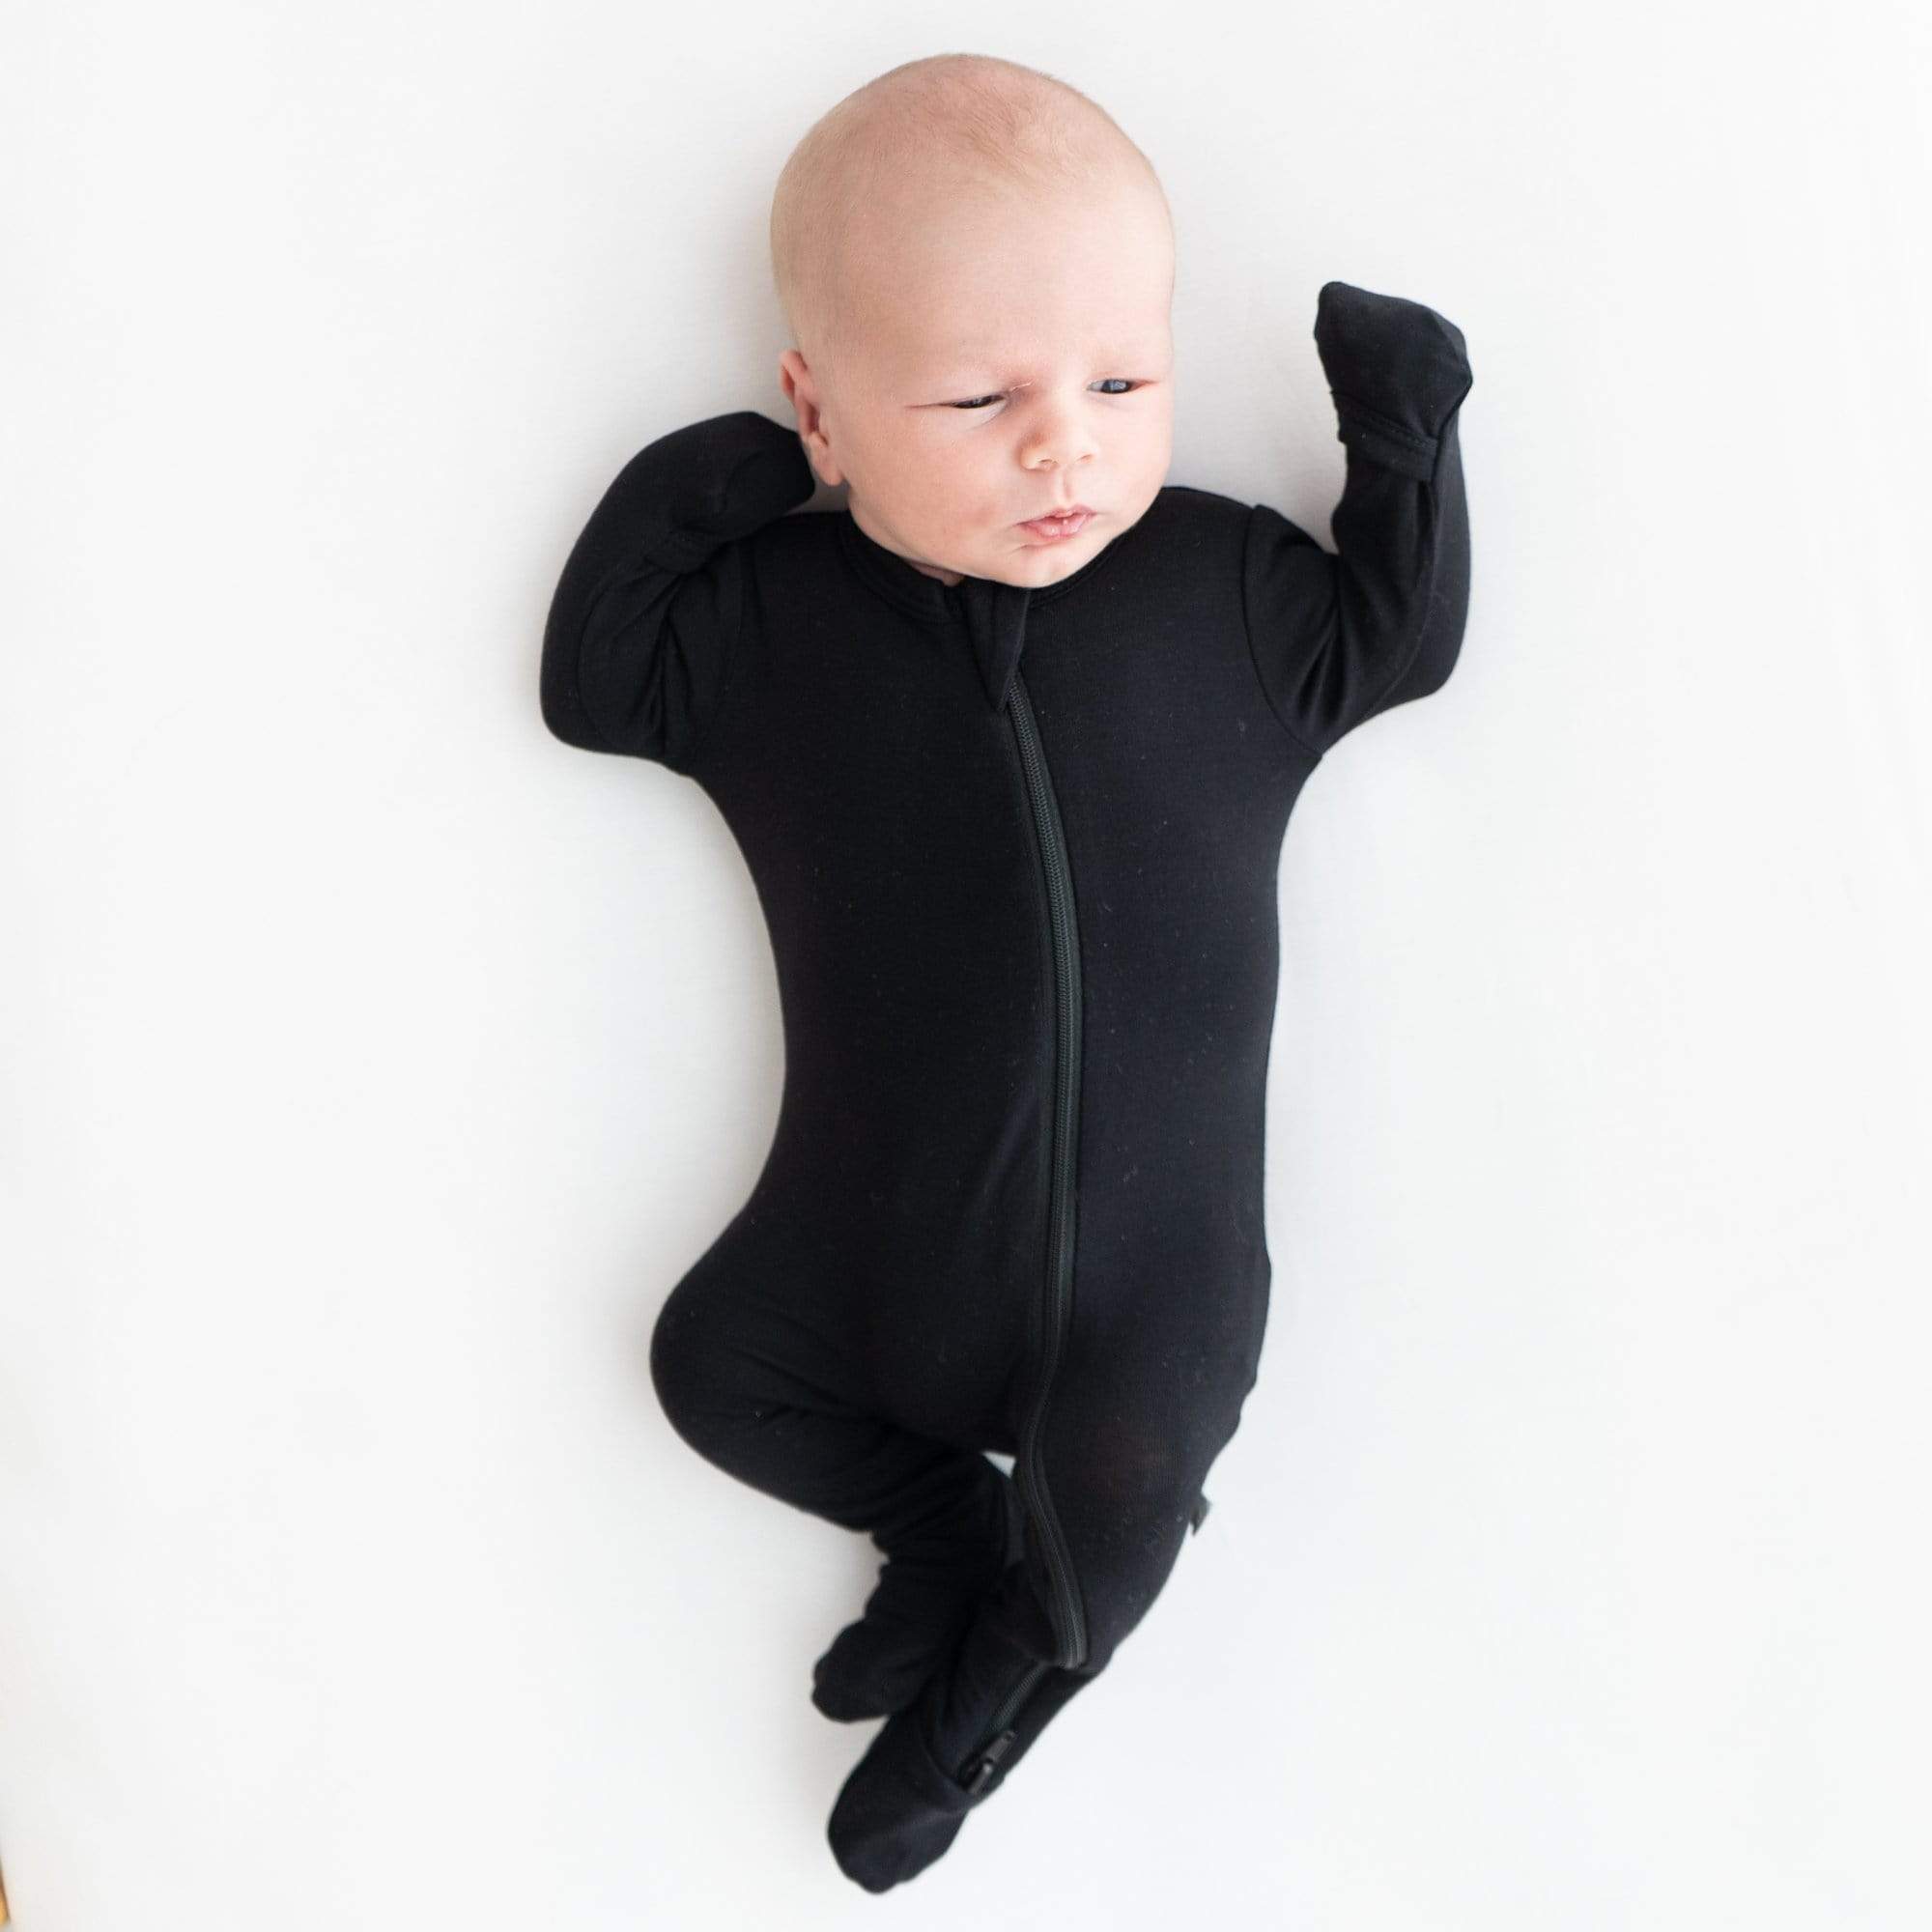 Baby wearing Kyte Baby breathable bamboo Zippered Footie pajamas in Midnight black